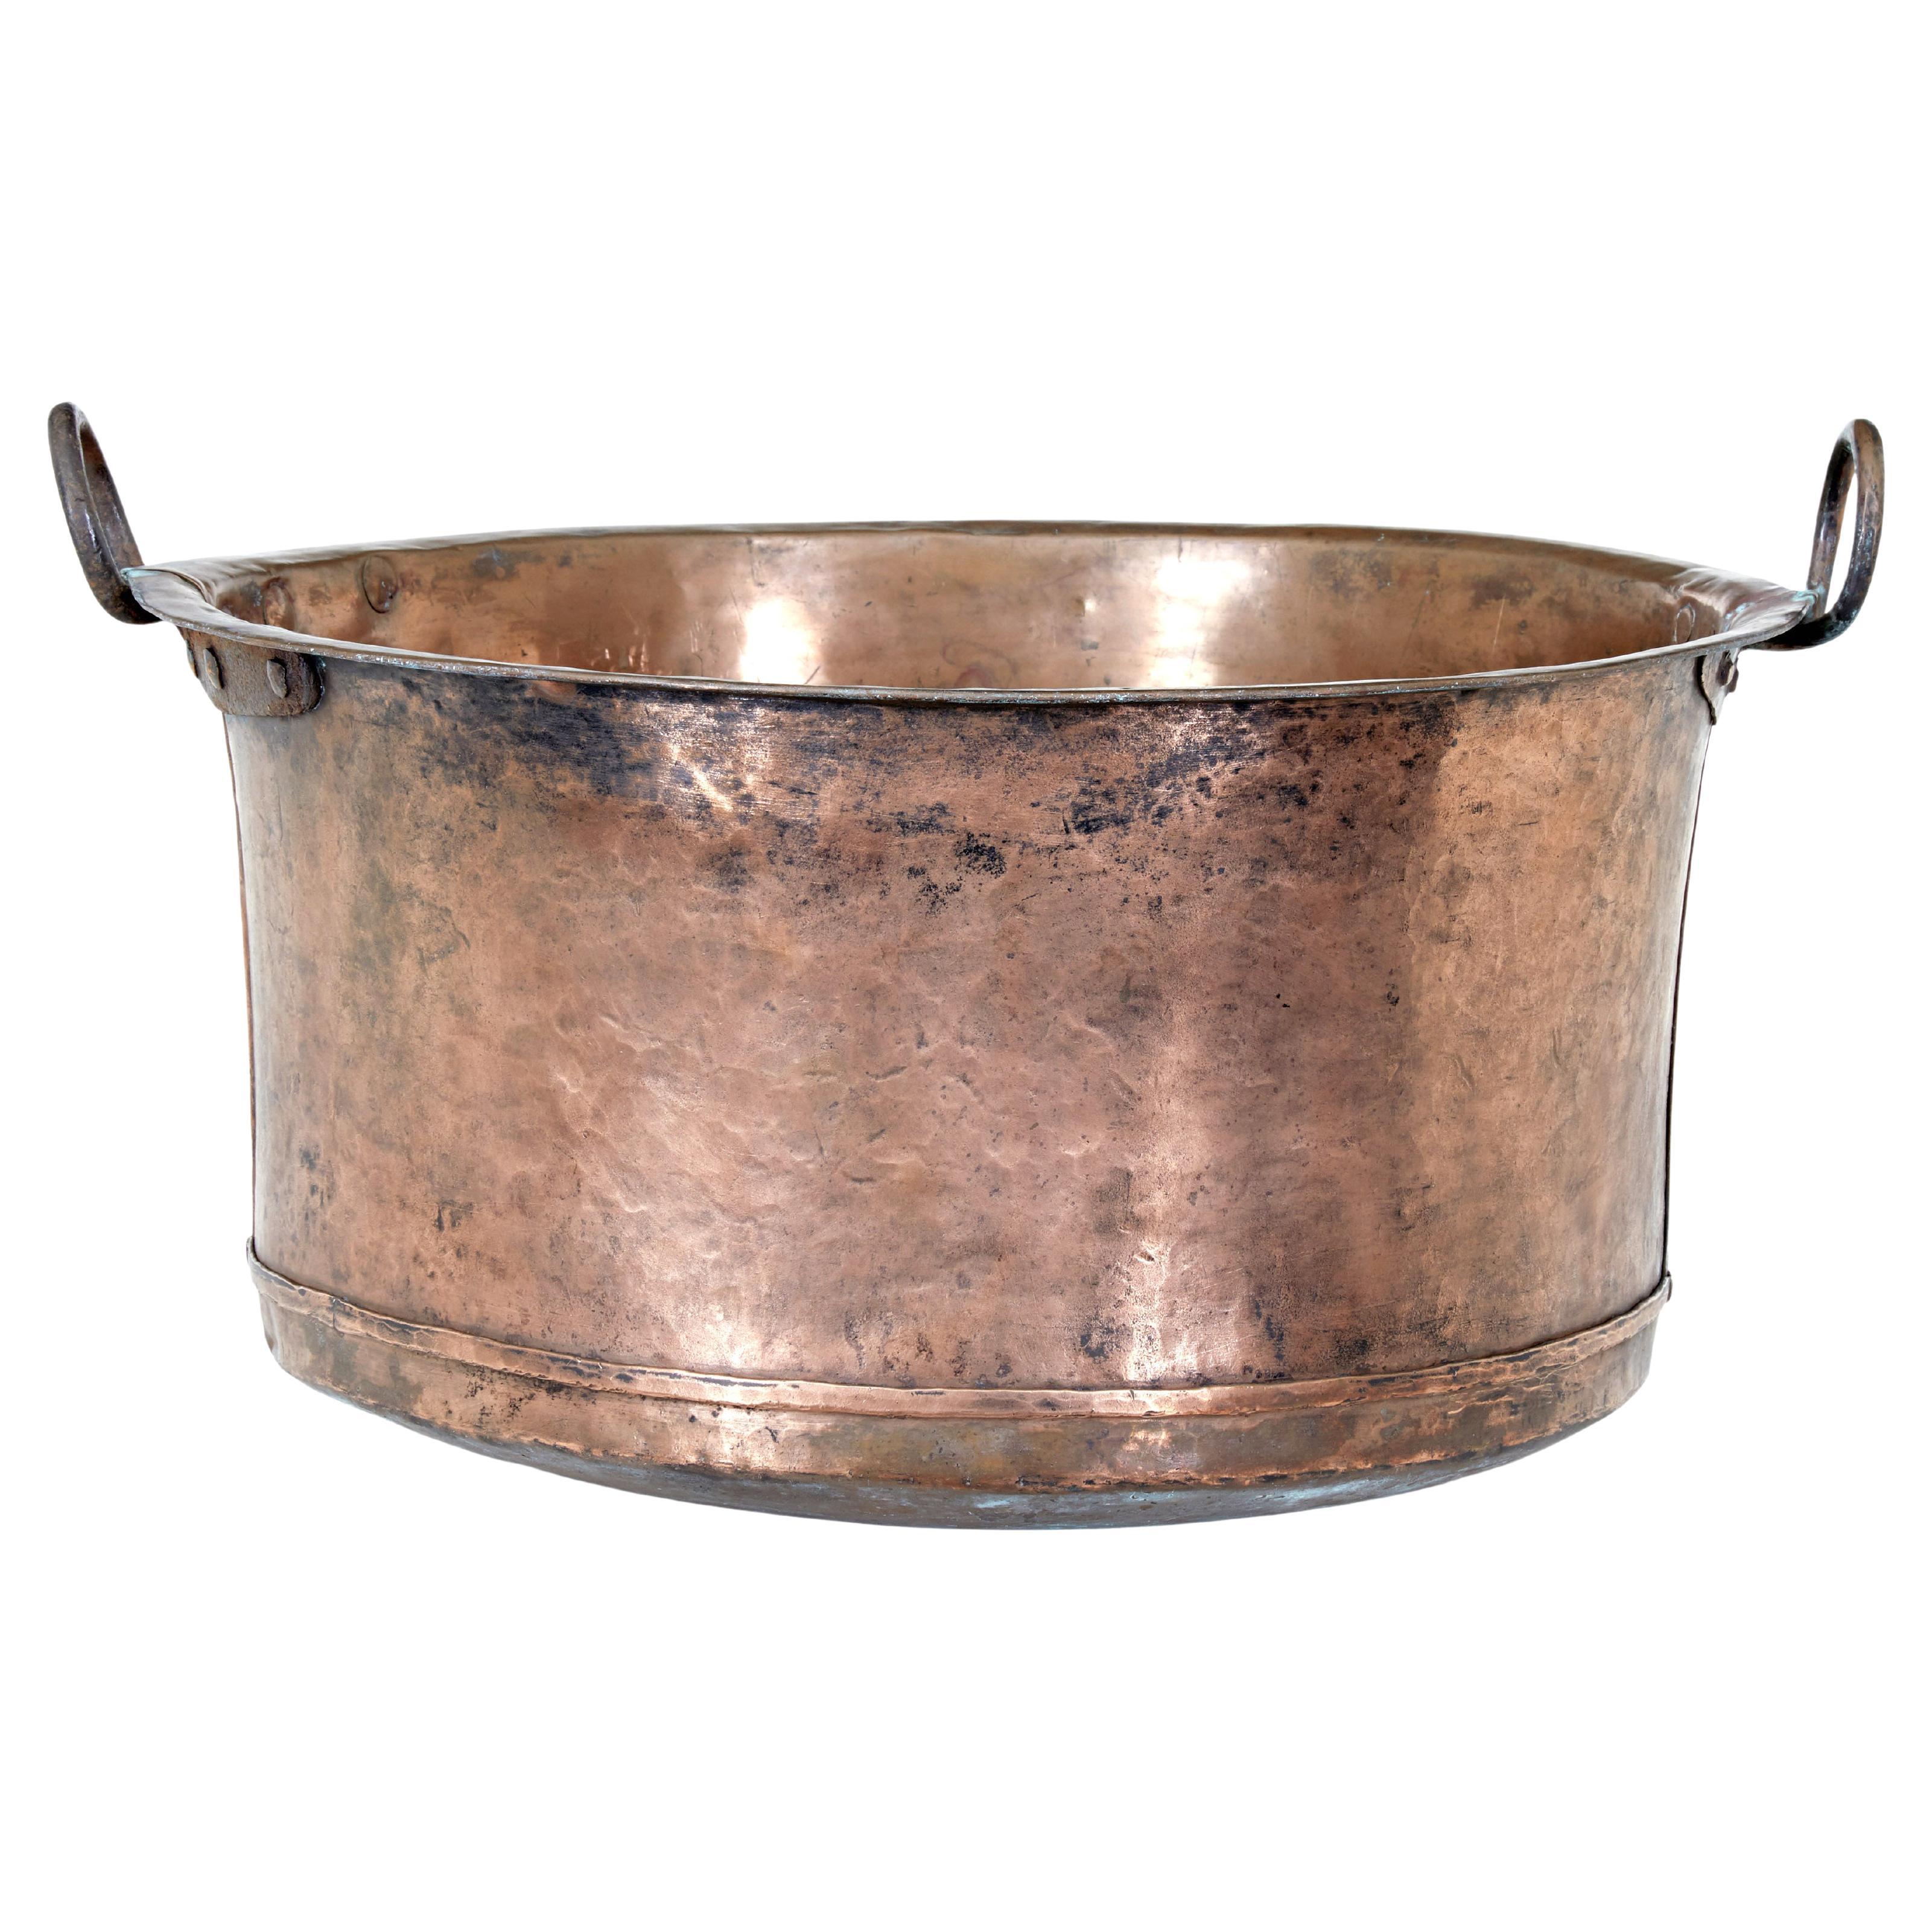 Large 19th Century Copper Cooking Vessel